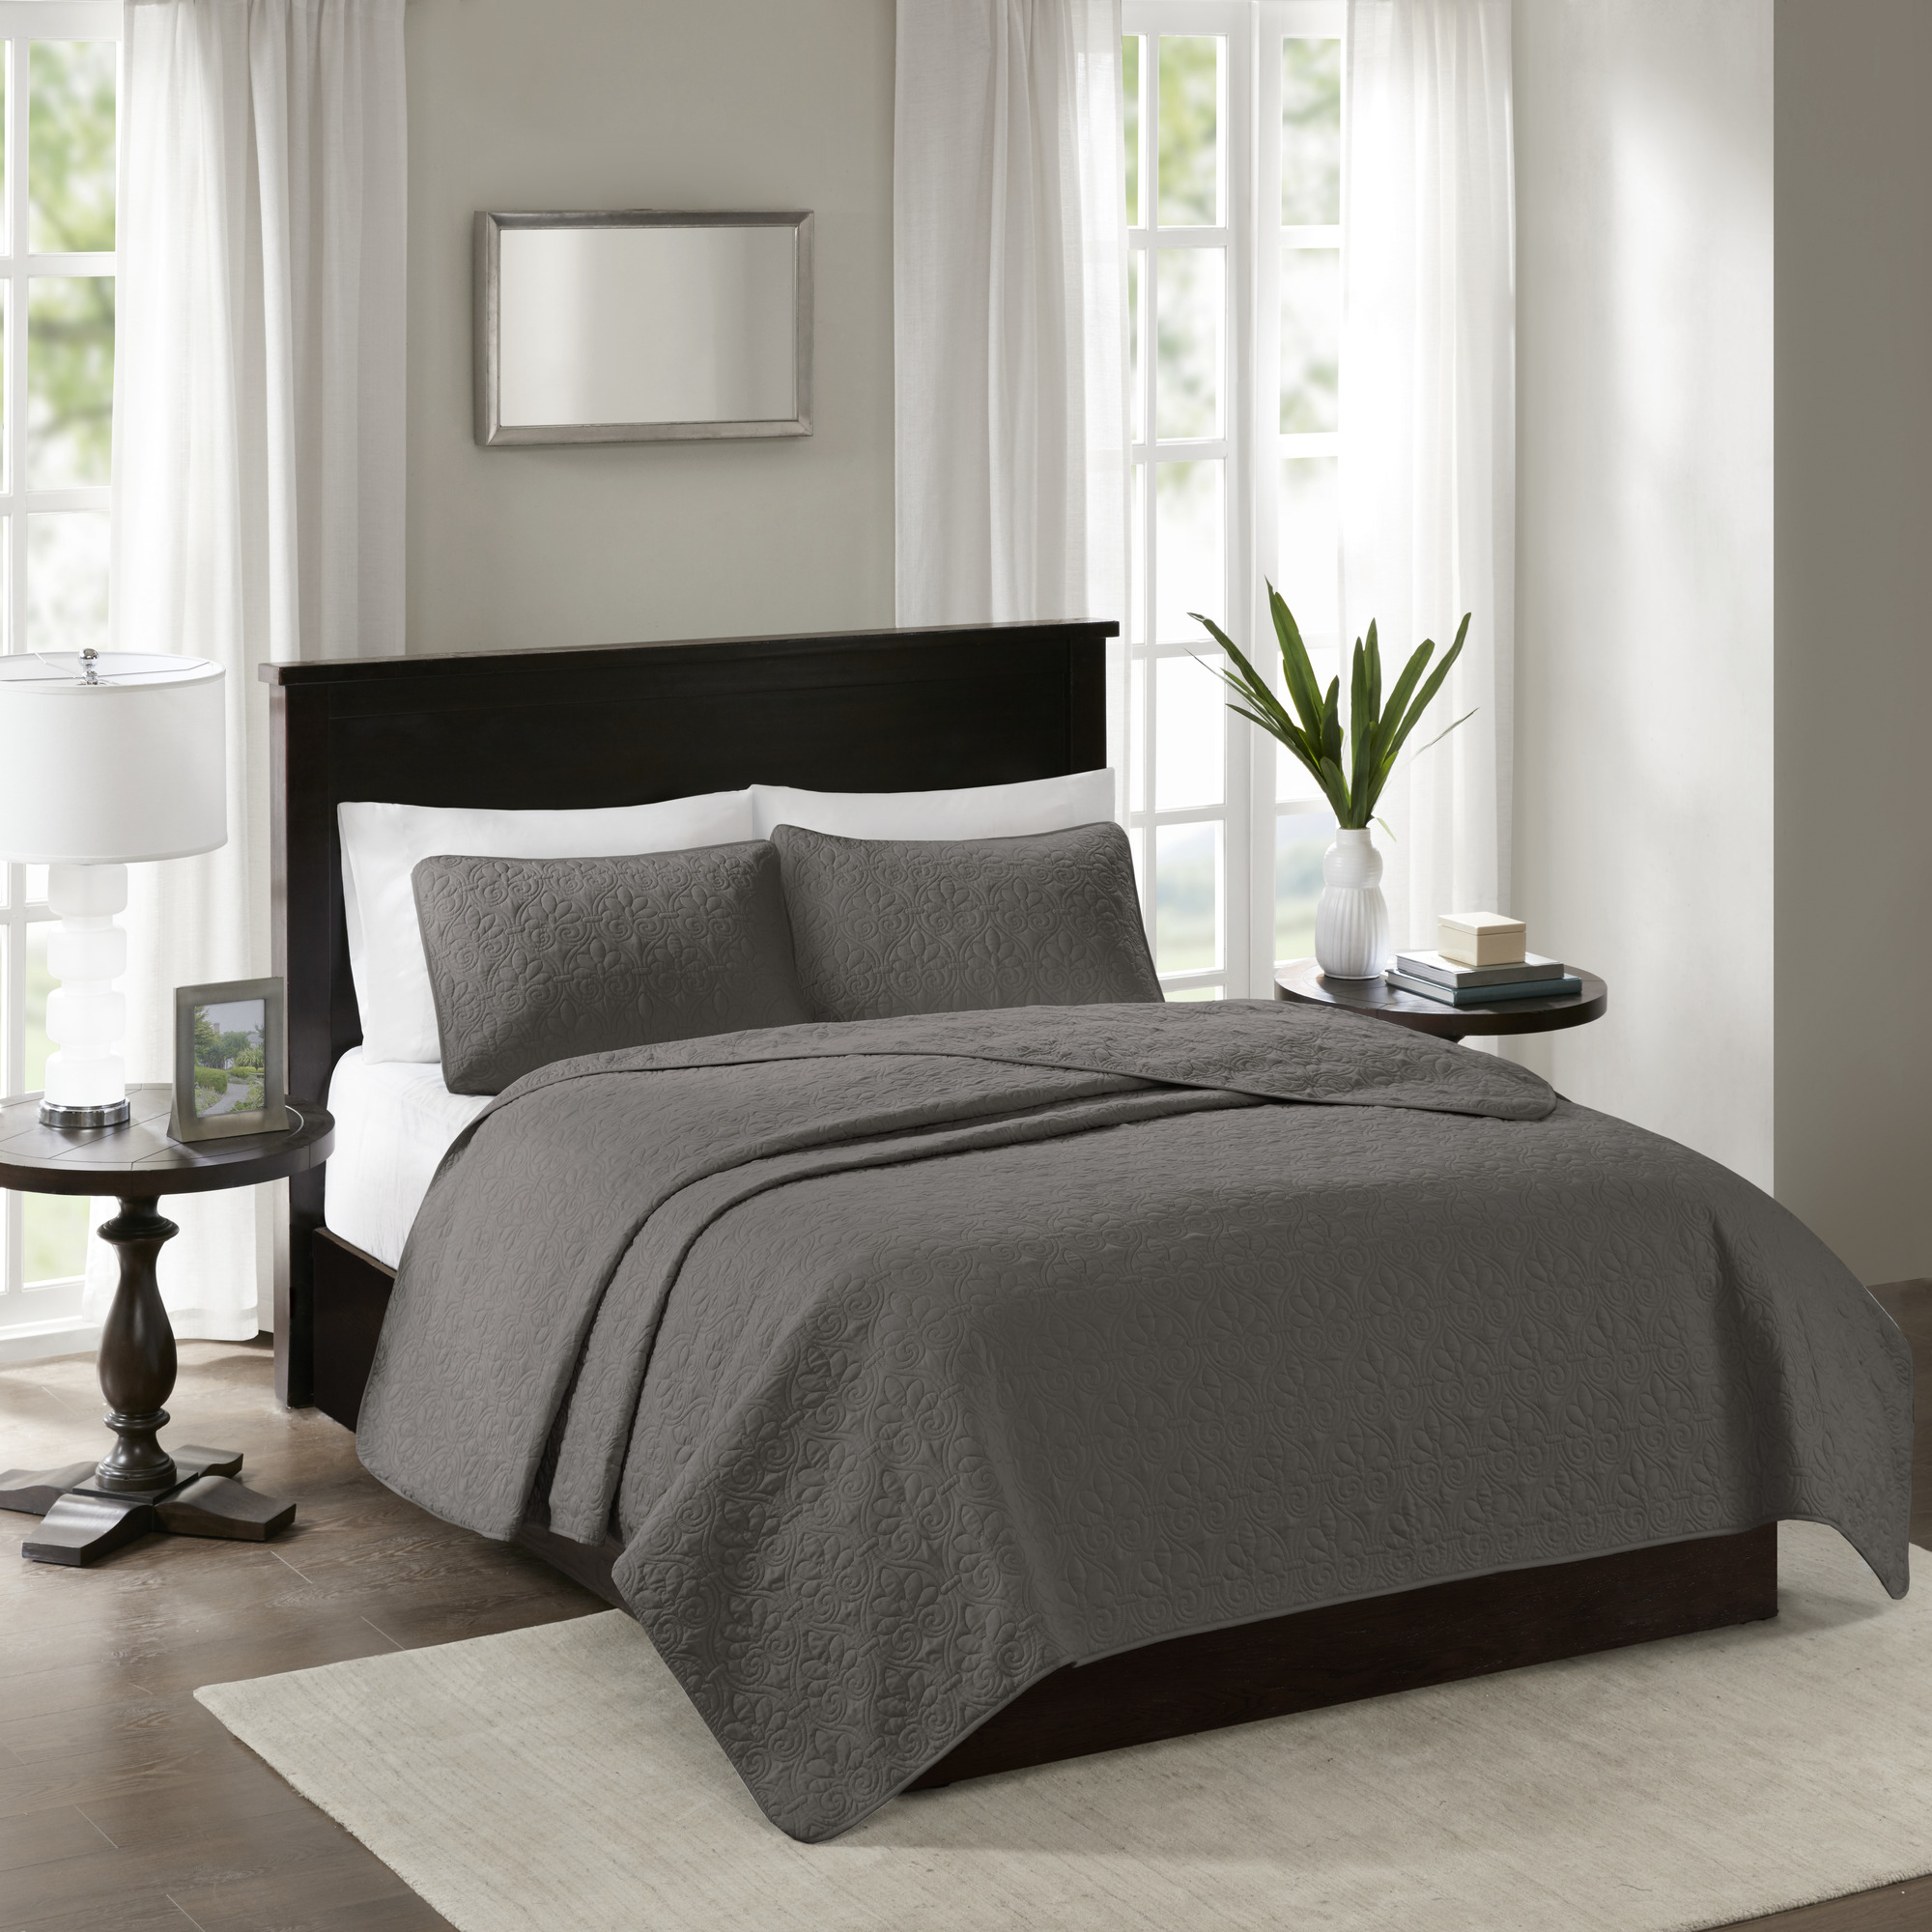 Home Essence Vancouver Super Soft Reversible Coverlet Set, Full/Queen, Dark Grey - image 3 of 13